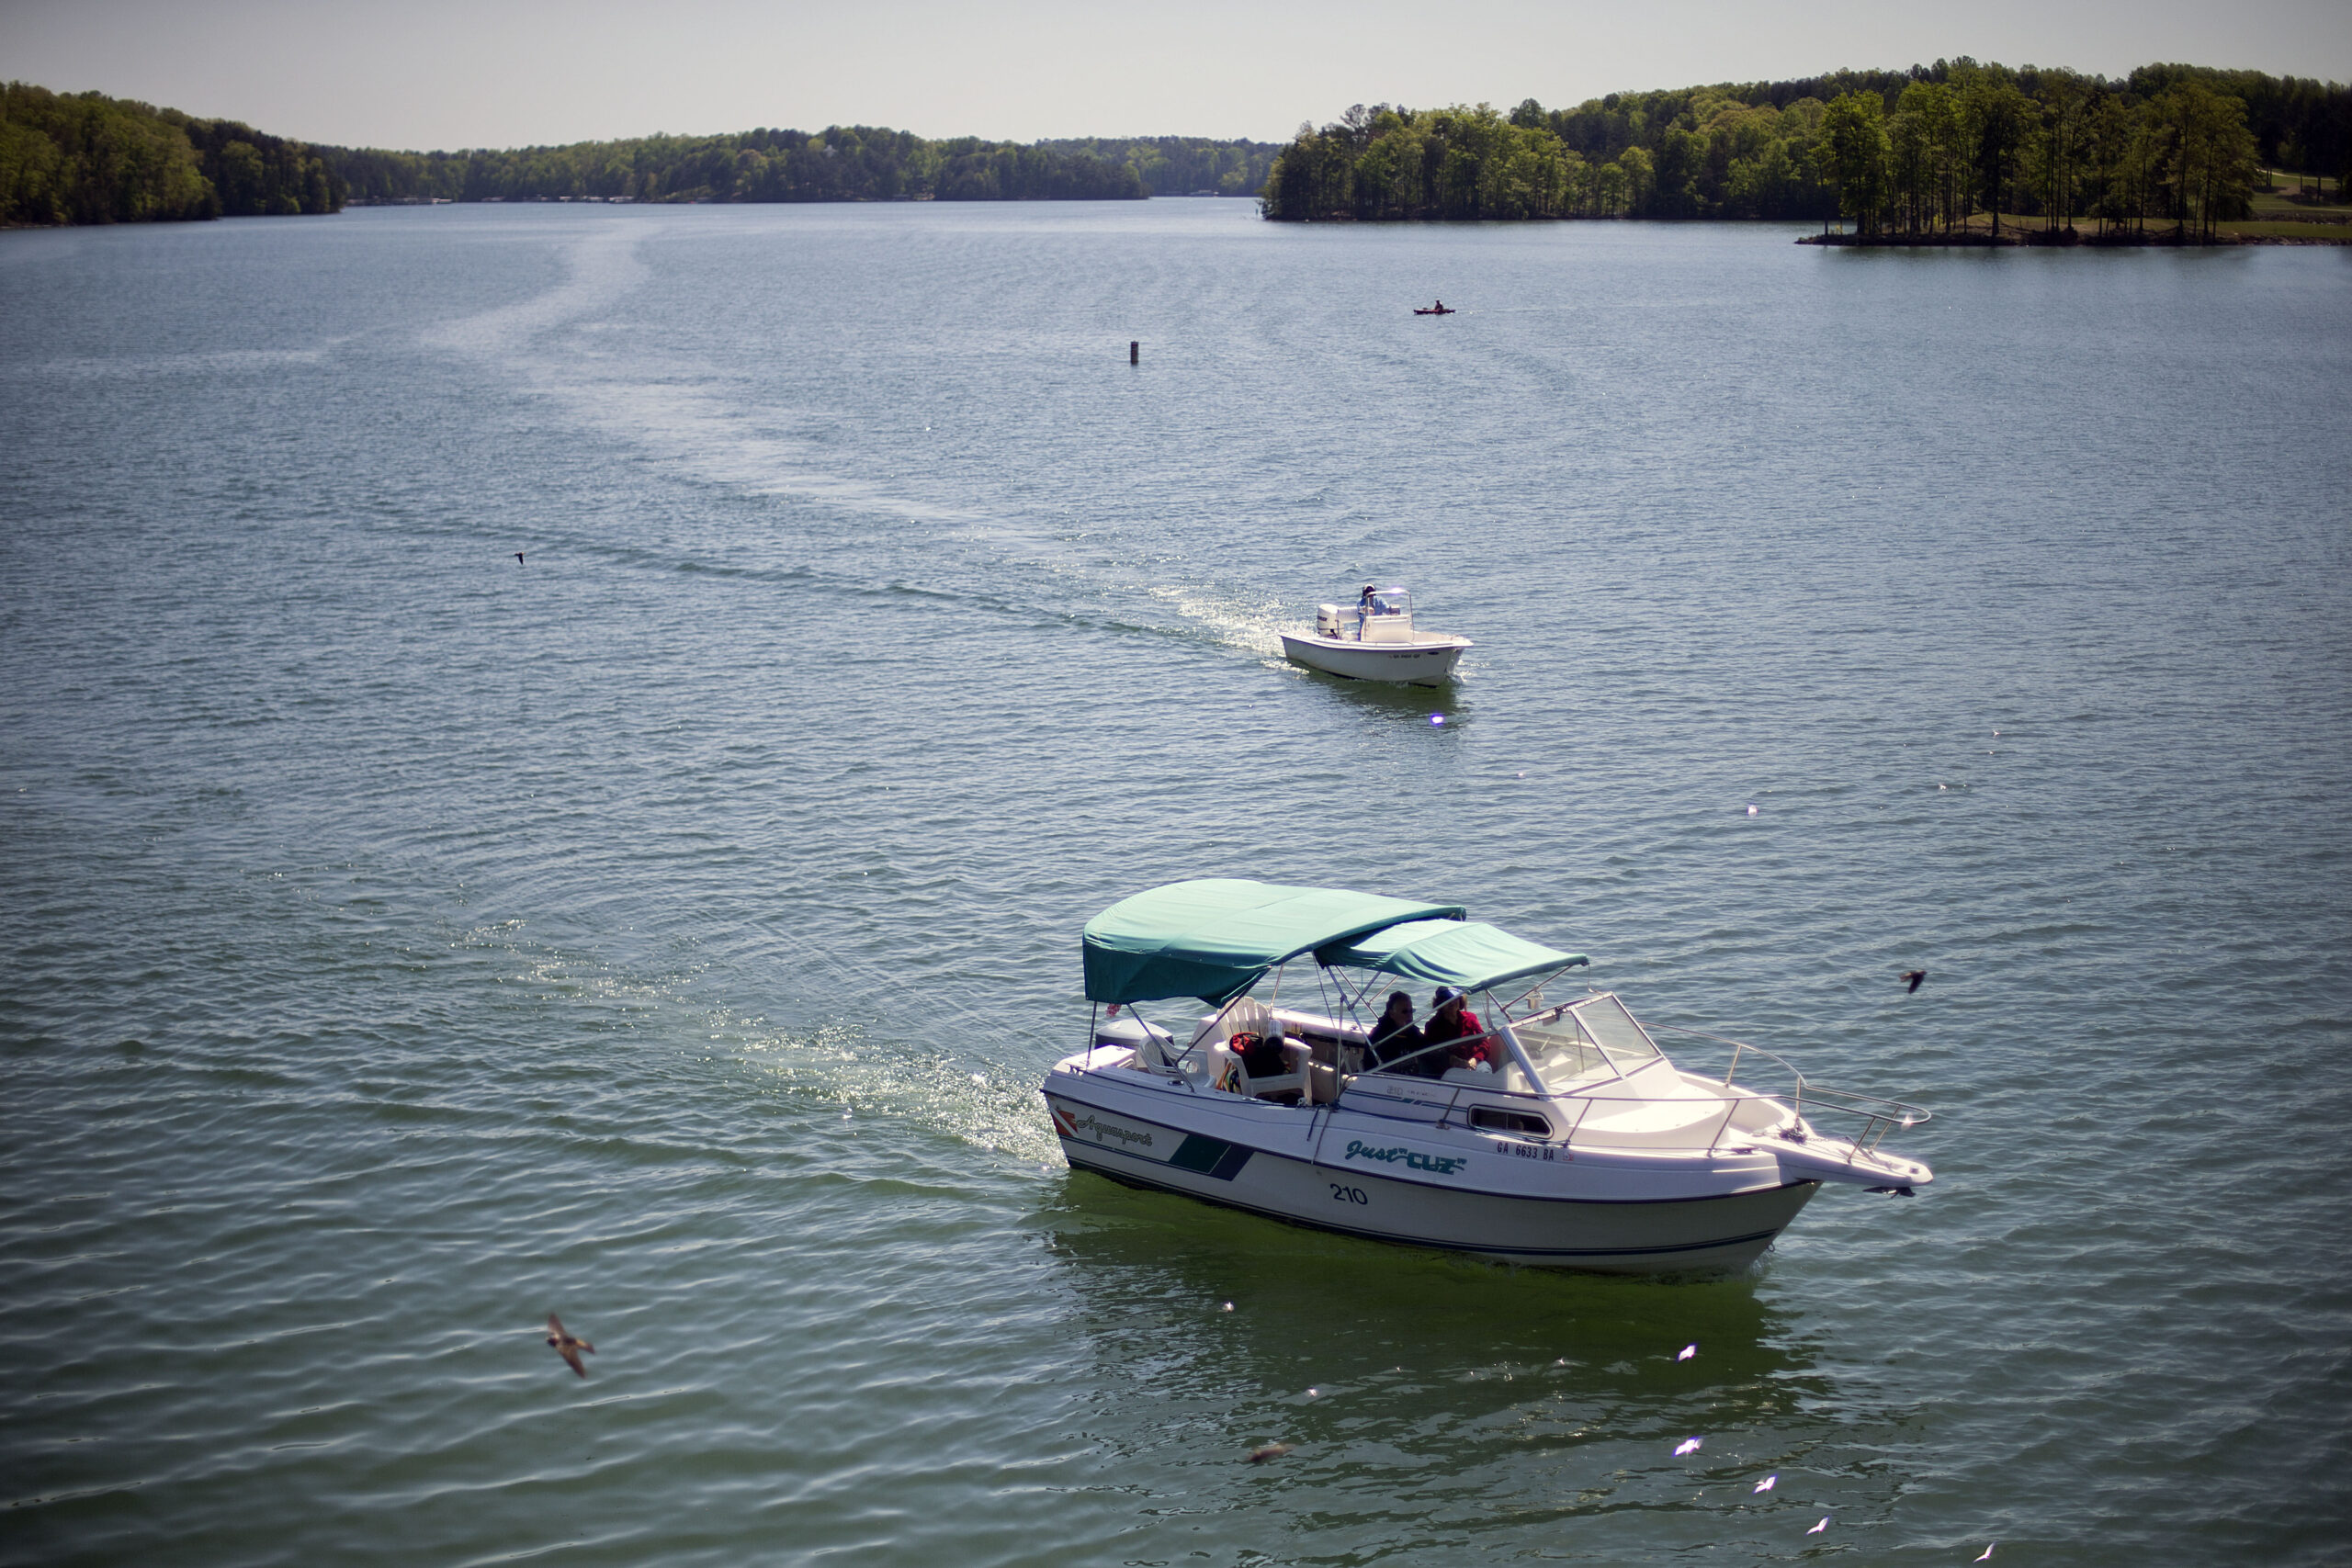 From life jackets to designated drivers, DNR urges safety as boat season kicks off